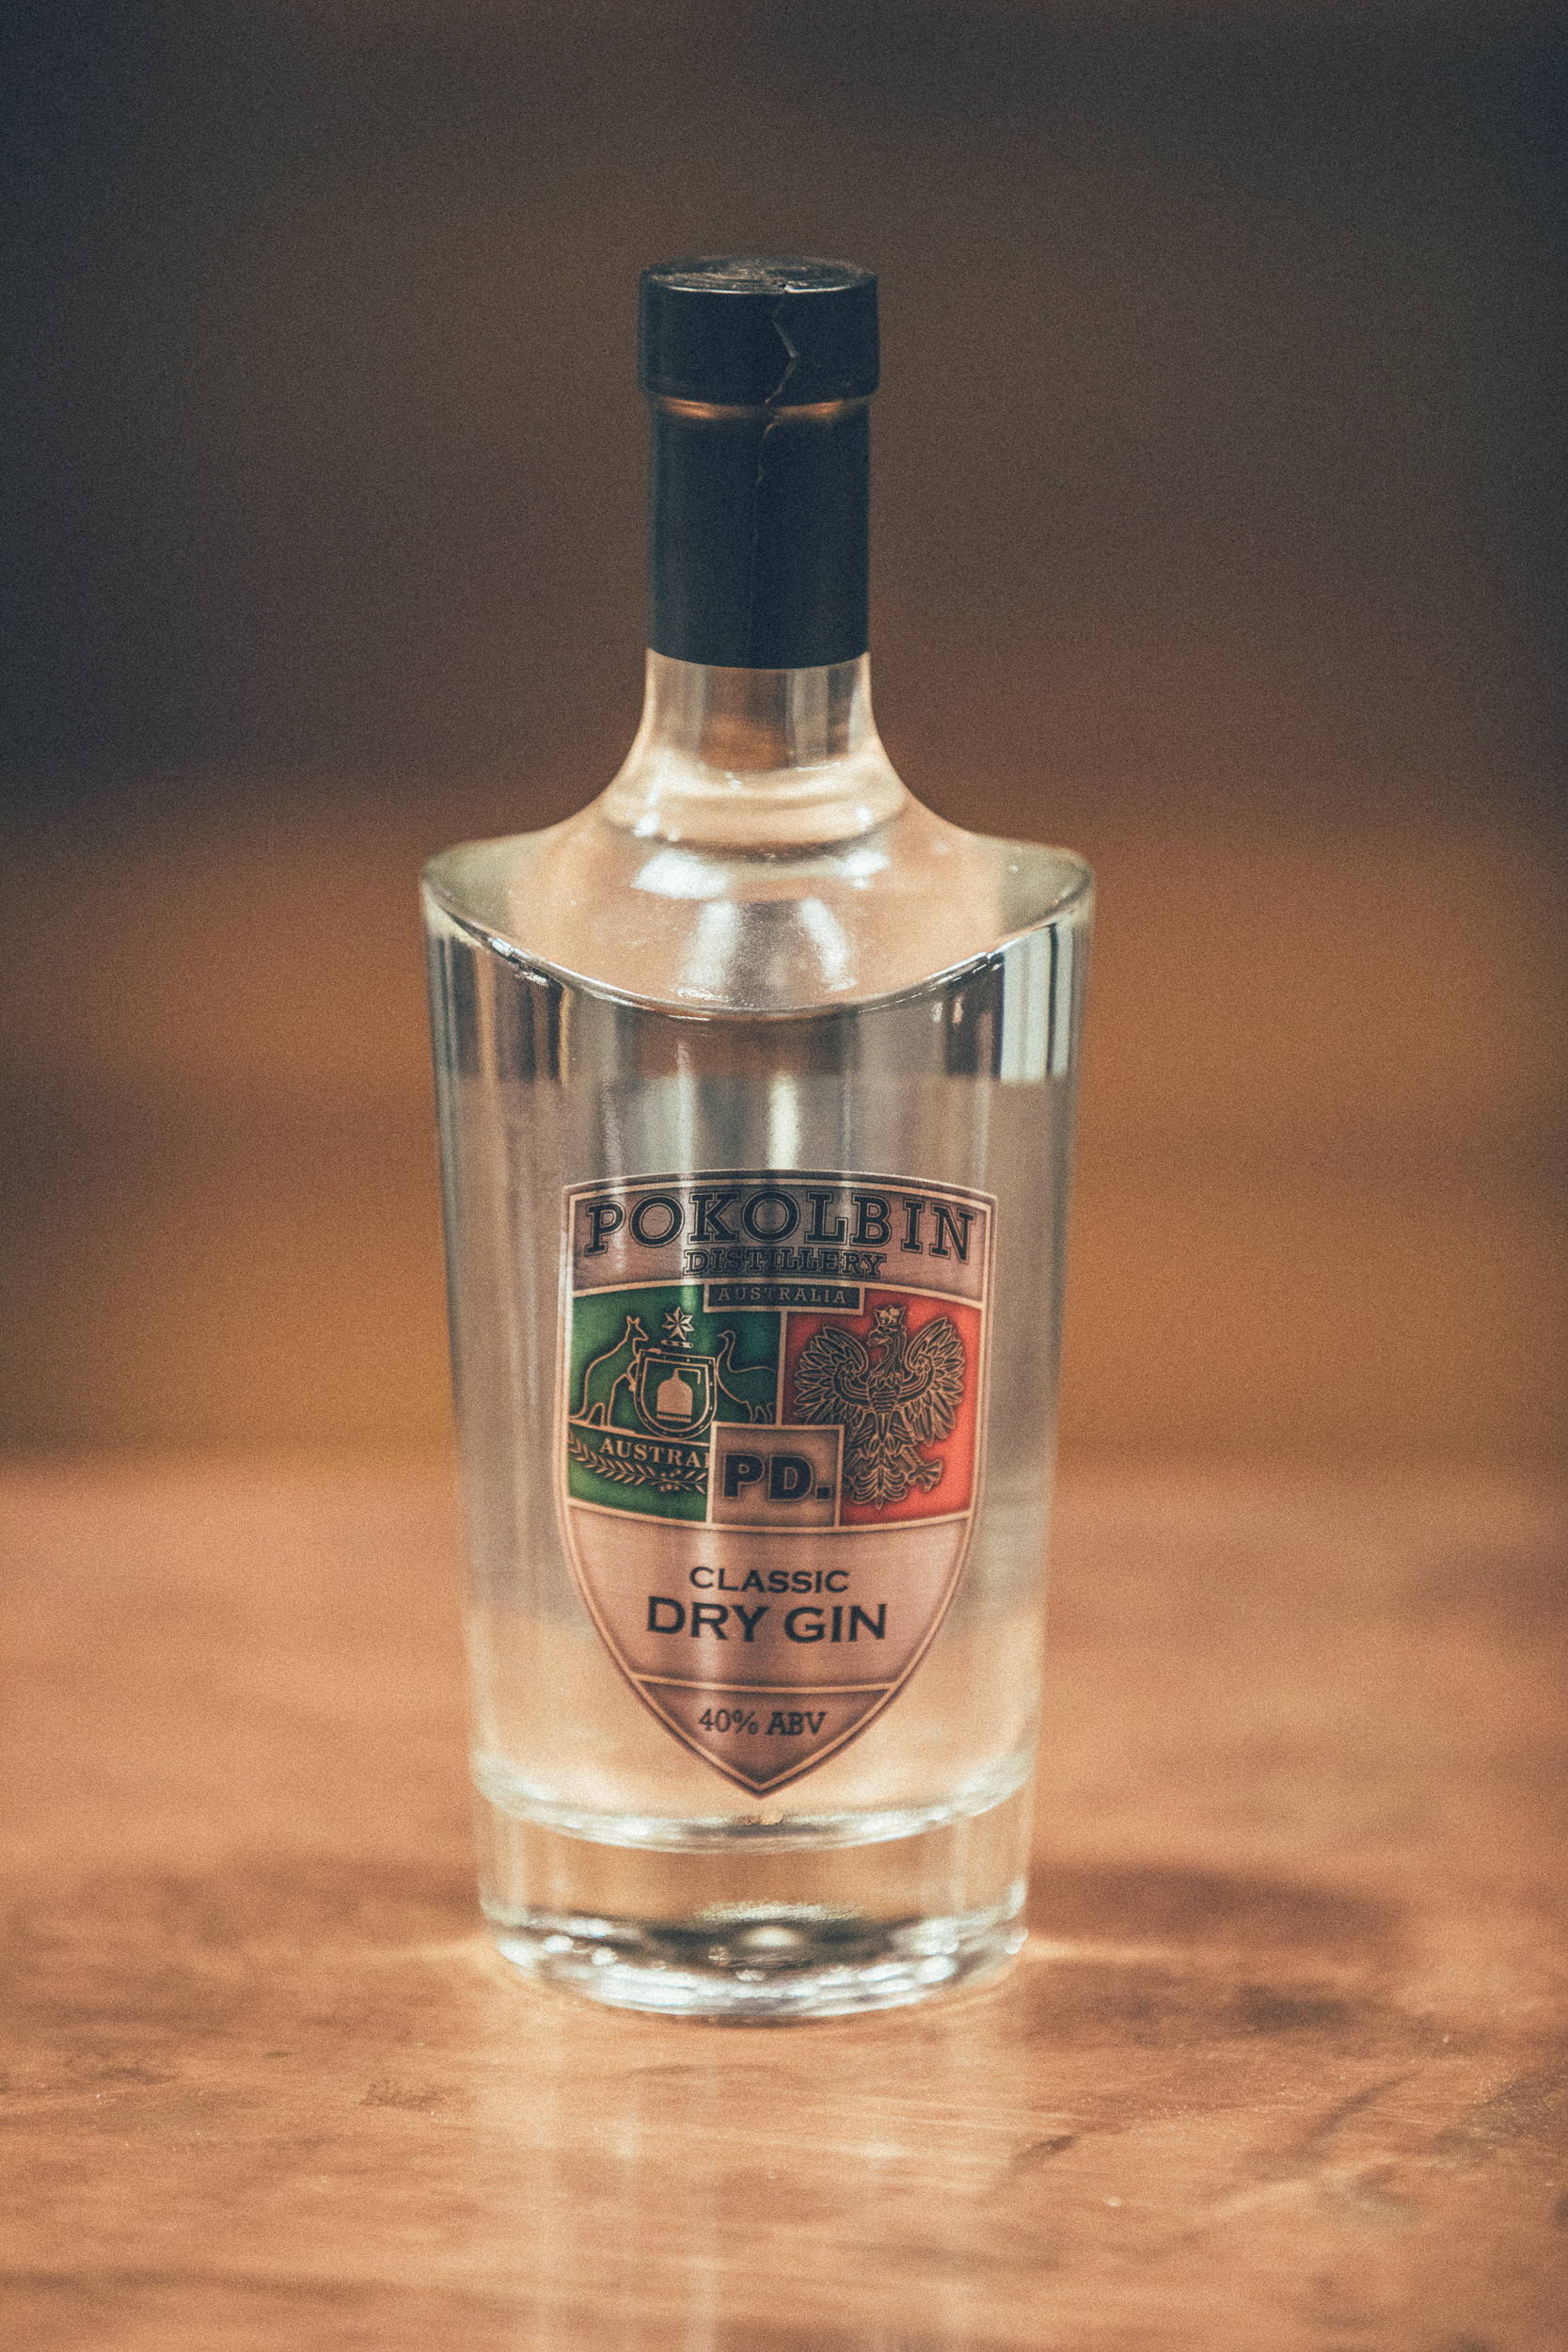 Bottle of Classic Dry Gin